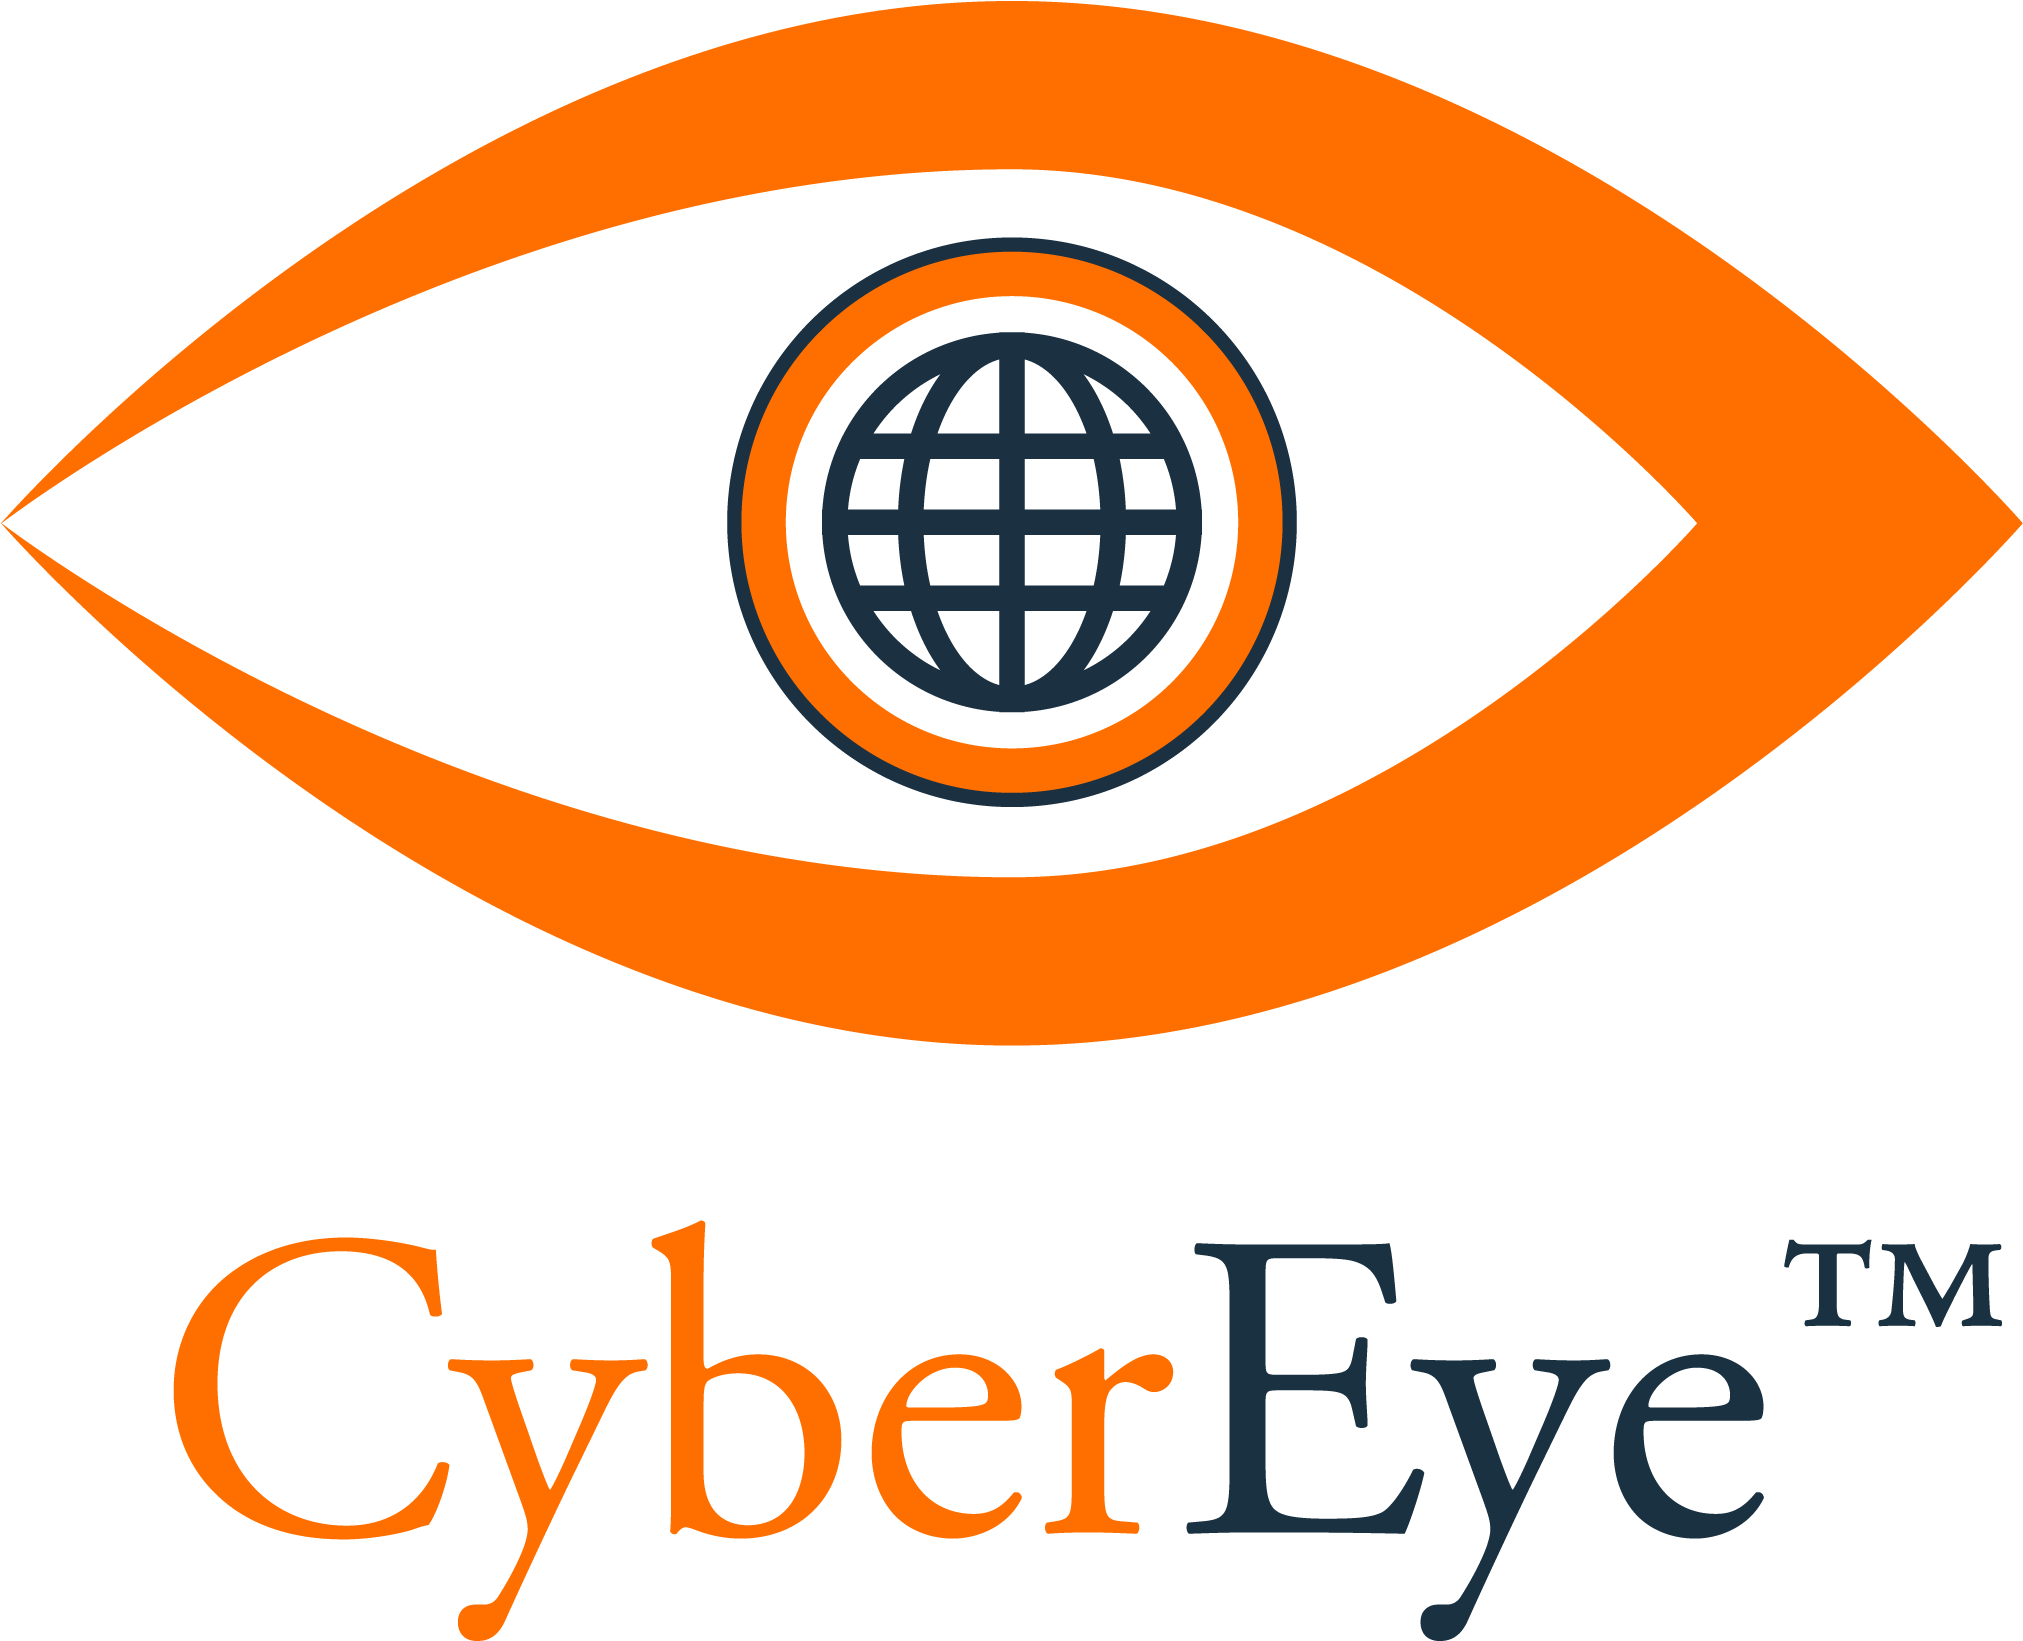 Cyber Security Services-government, Corporate, Educational - Cyber Security Company Logo (2048x2048)